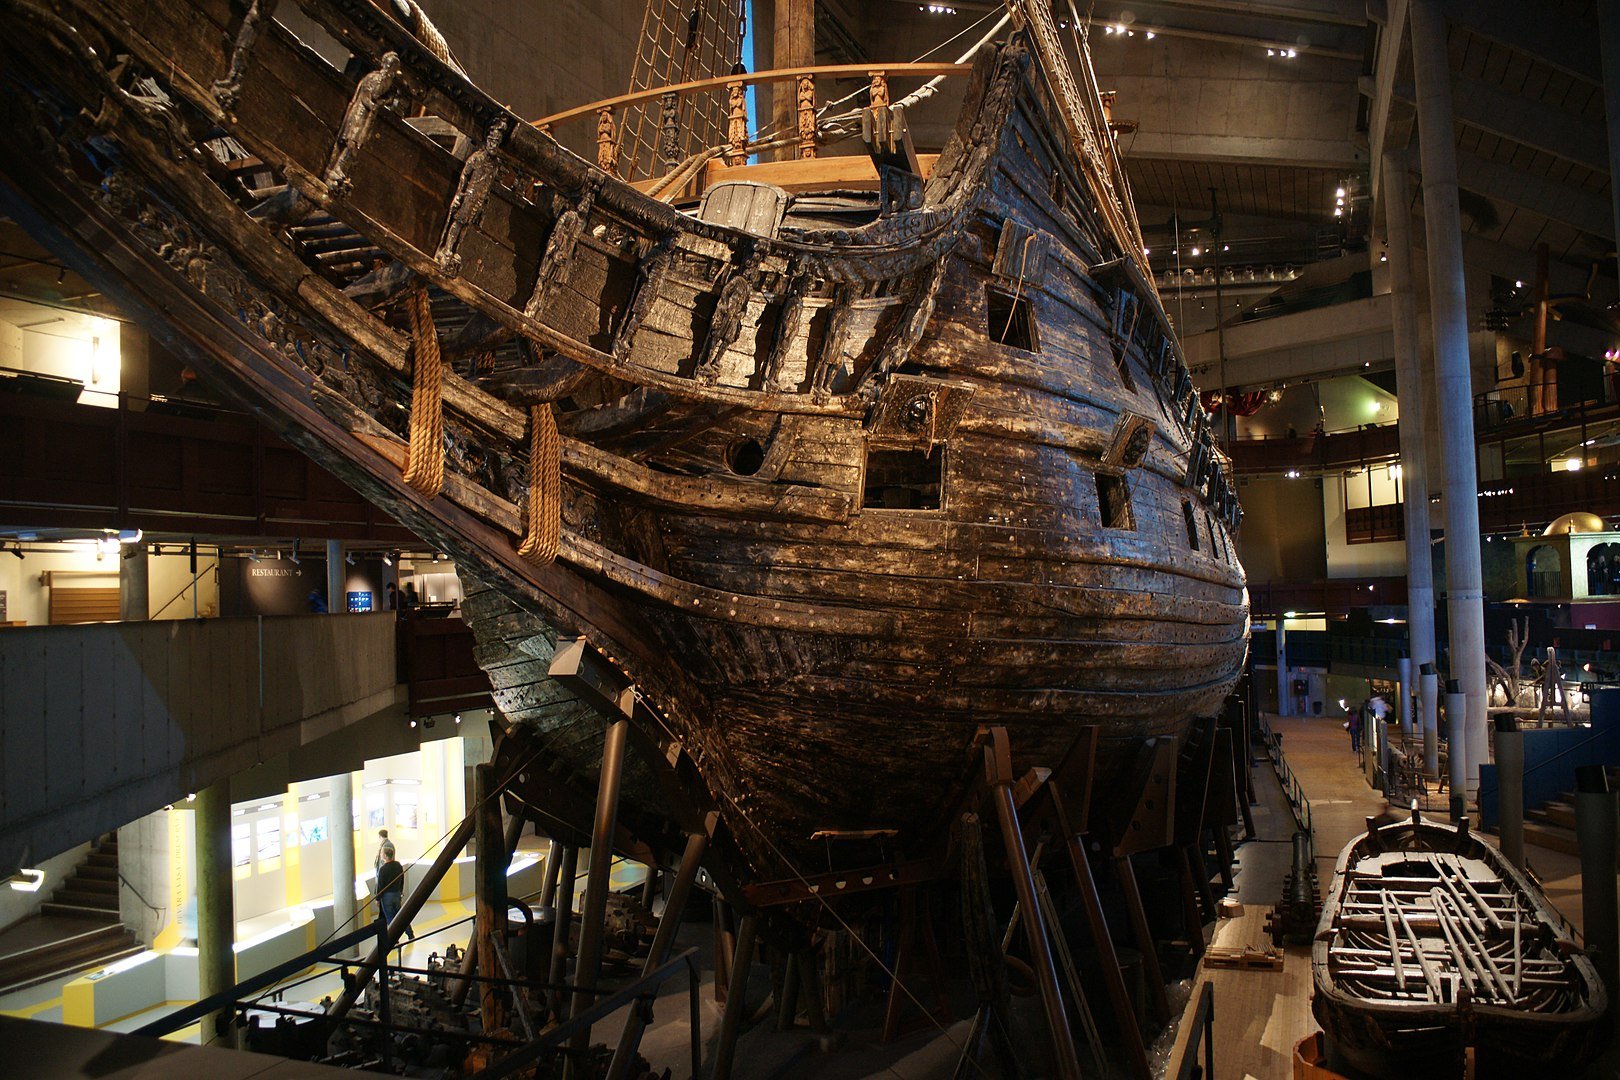 The Vasa: By JavierKohen - Own work, CC BY-SA 3.0, https://commons.wikimedia.org/w/index.php?curid=8037128